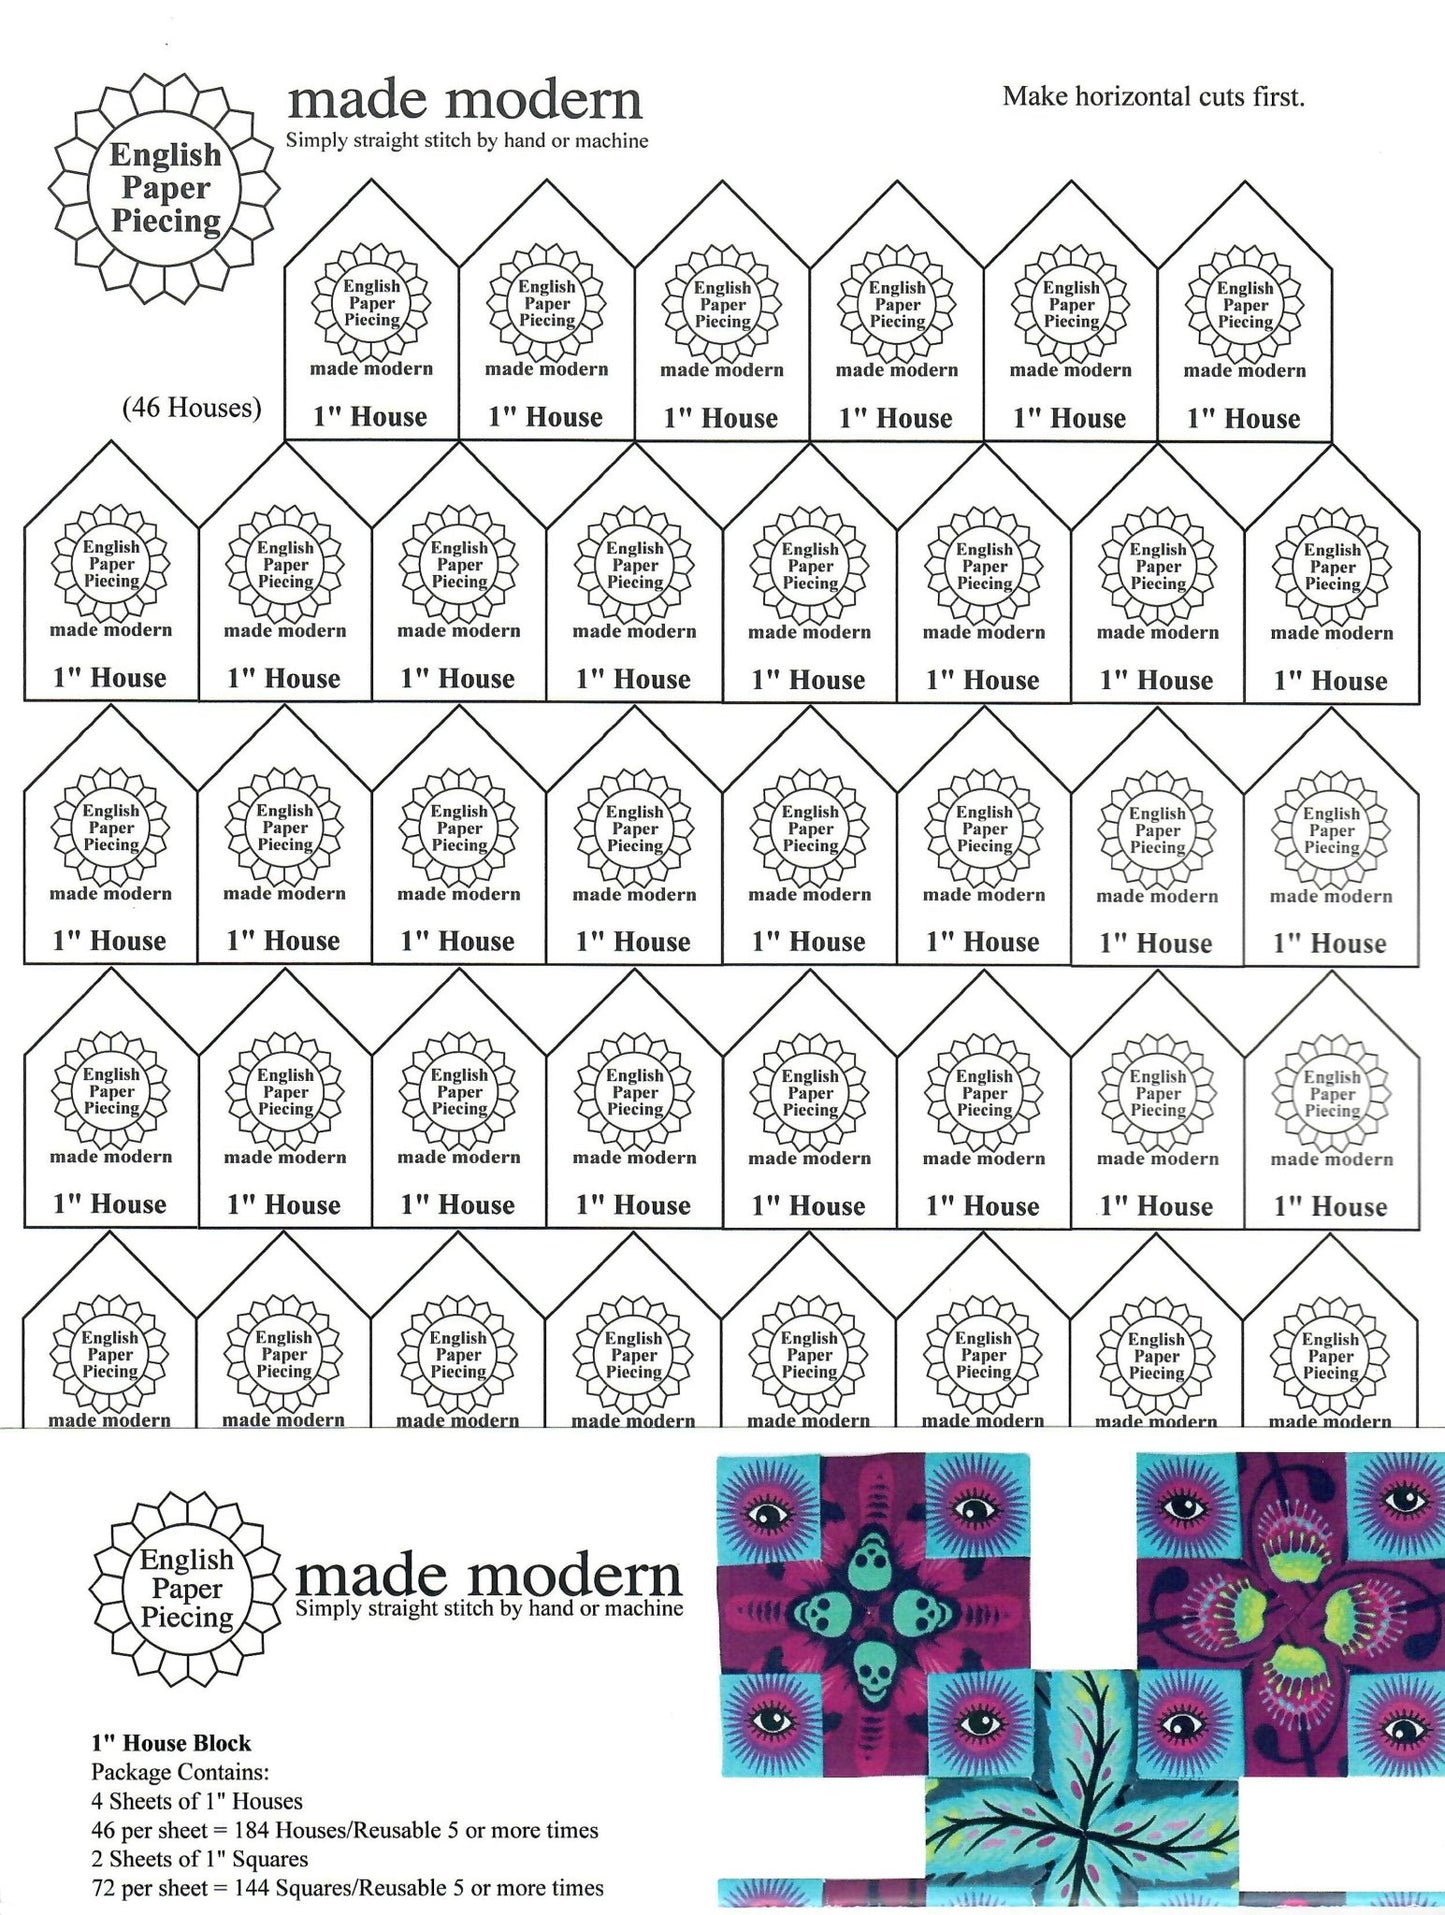 Traditional vs. Modern: Exploring English Paper Piecing Styles